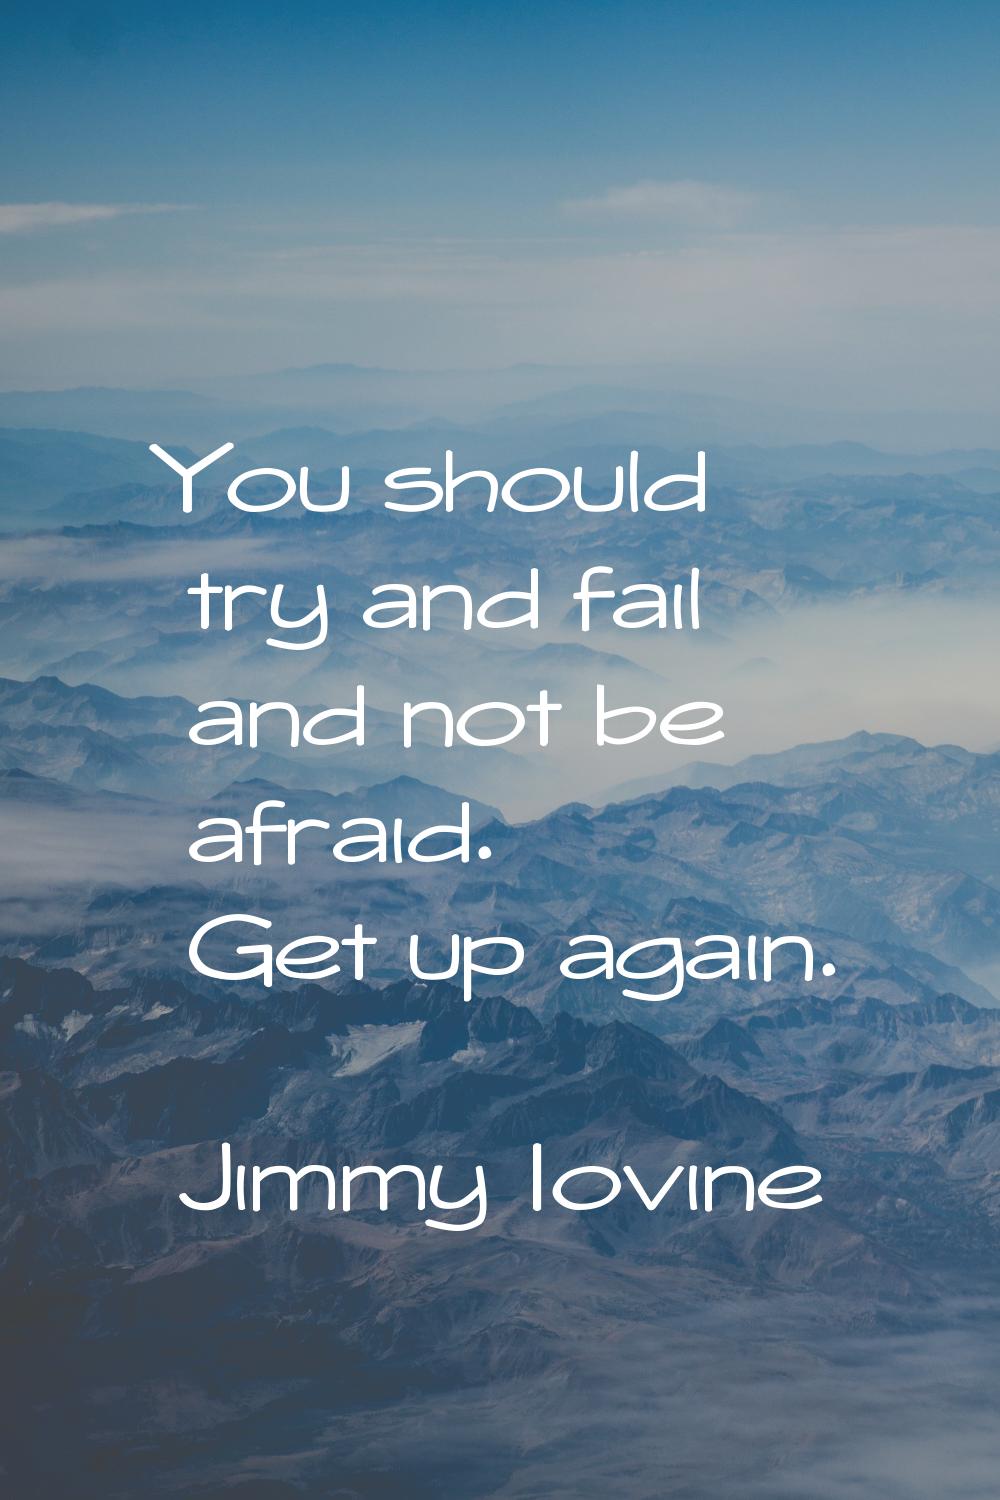 You should try and fail and not be afraid. Get up again.